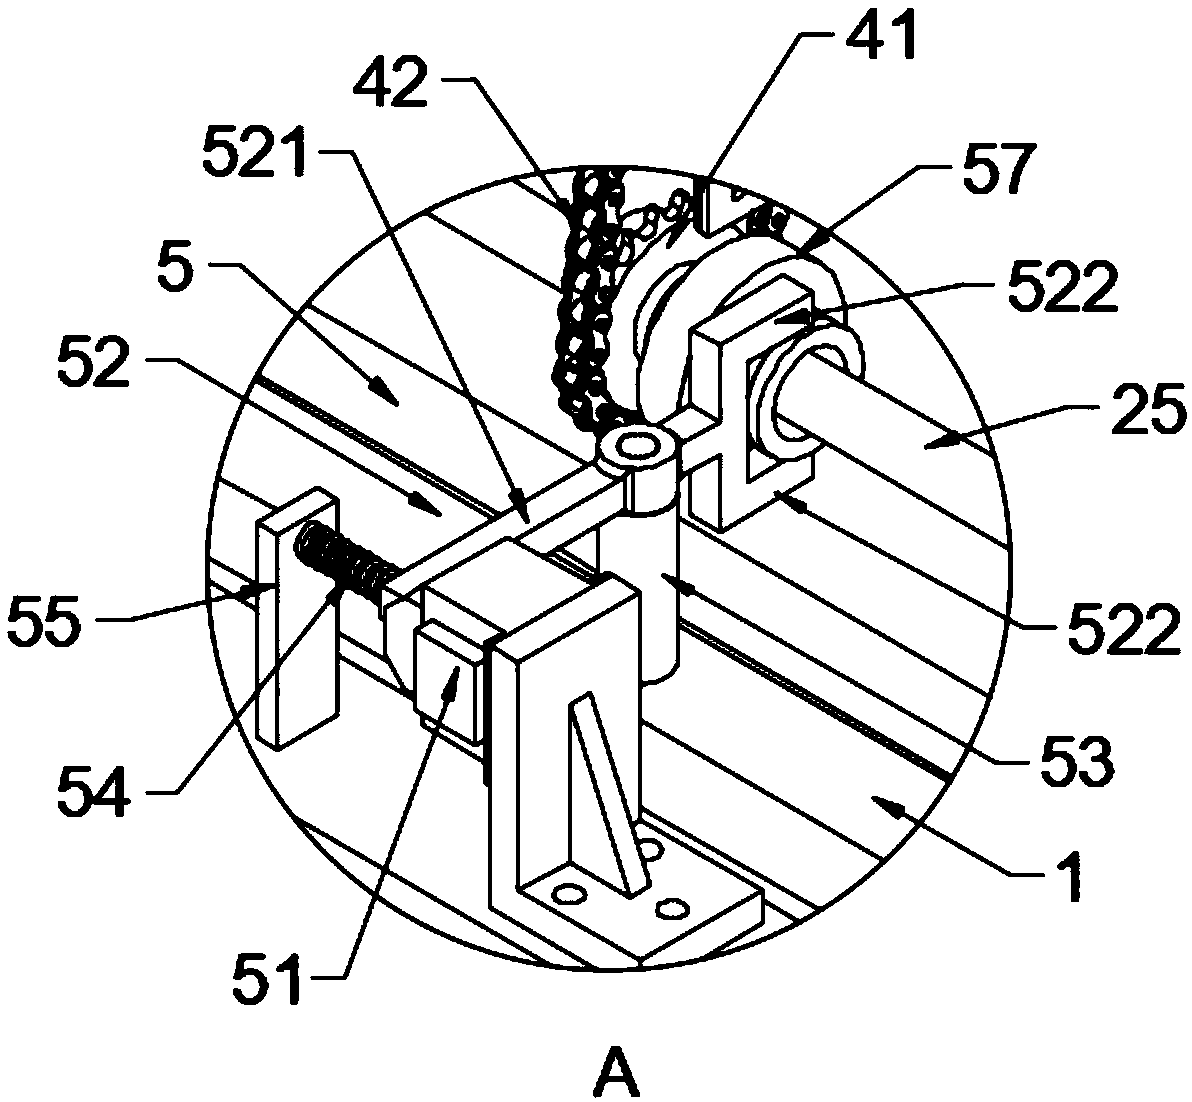 Material returning device for forging and heating of automobile half shafts